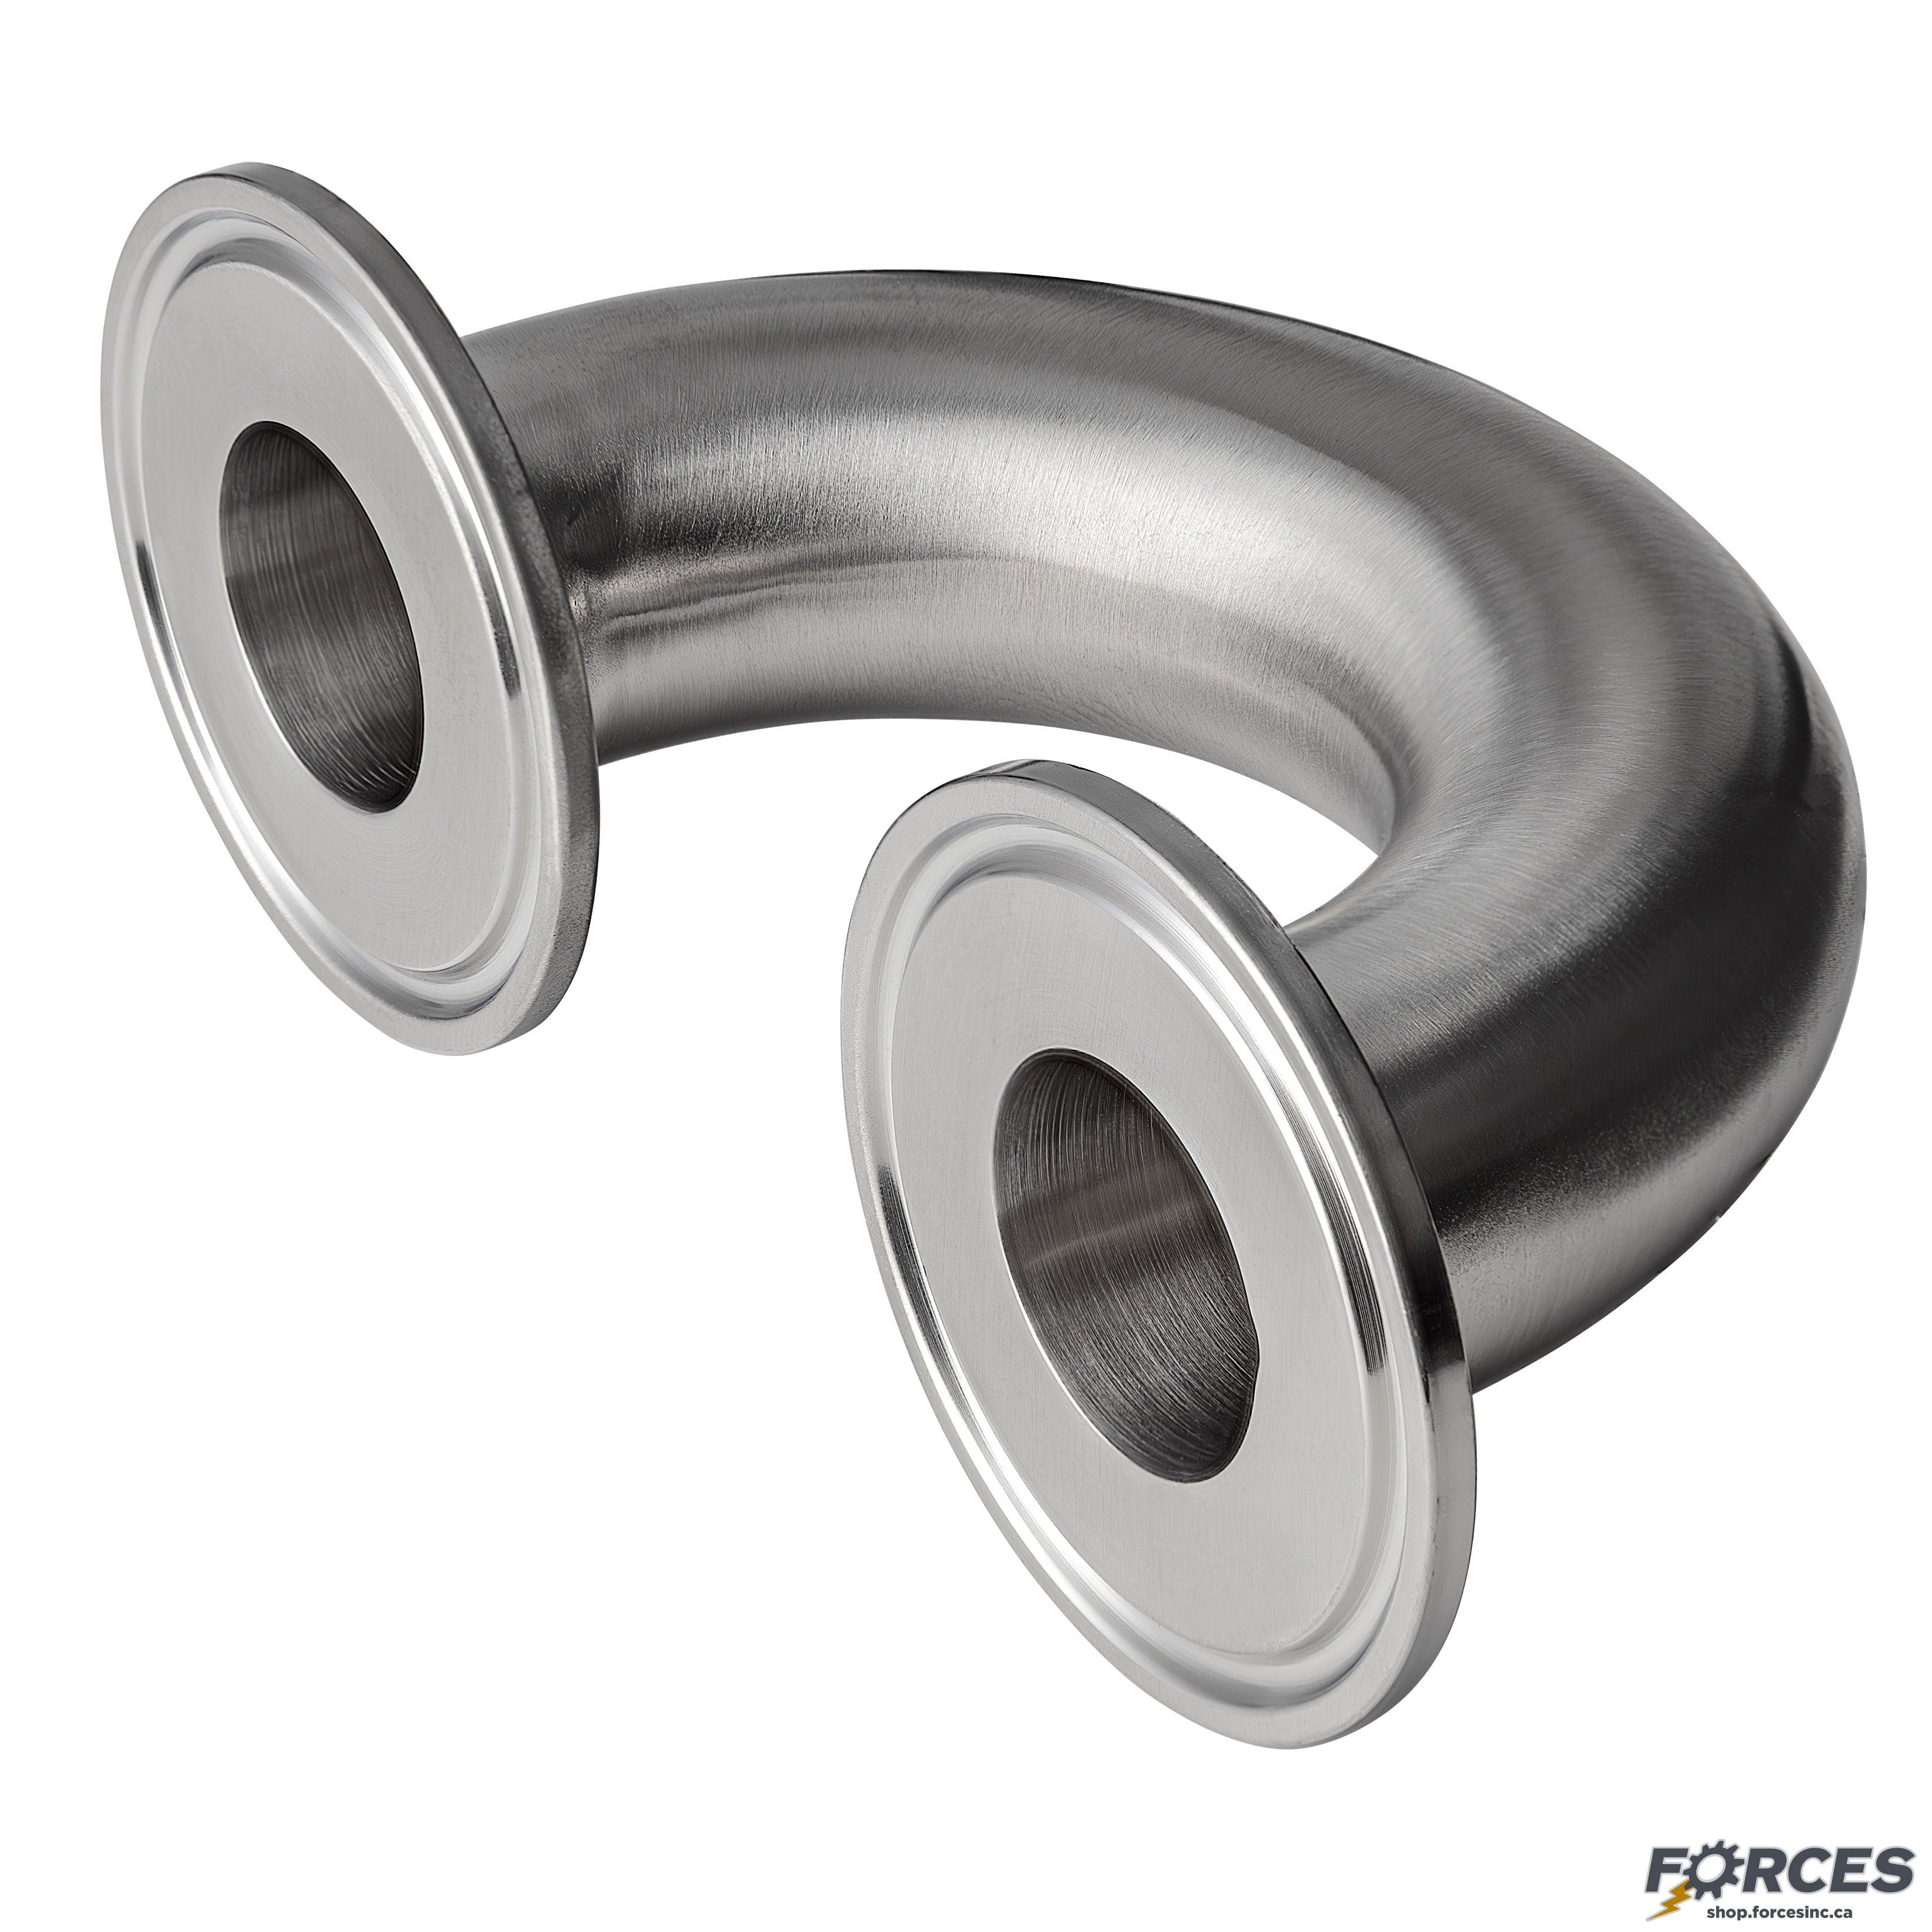 2-1/2" Tri-Clamp 180° Elbow - Stainless Steel 316 - Forces Inc